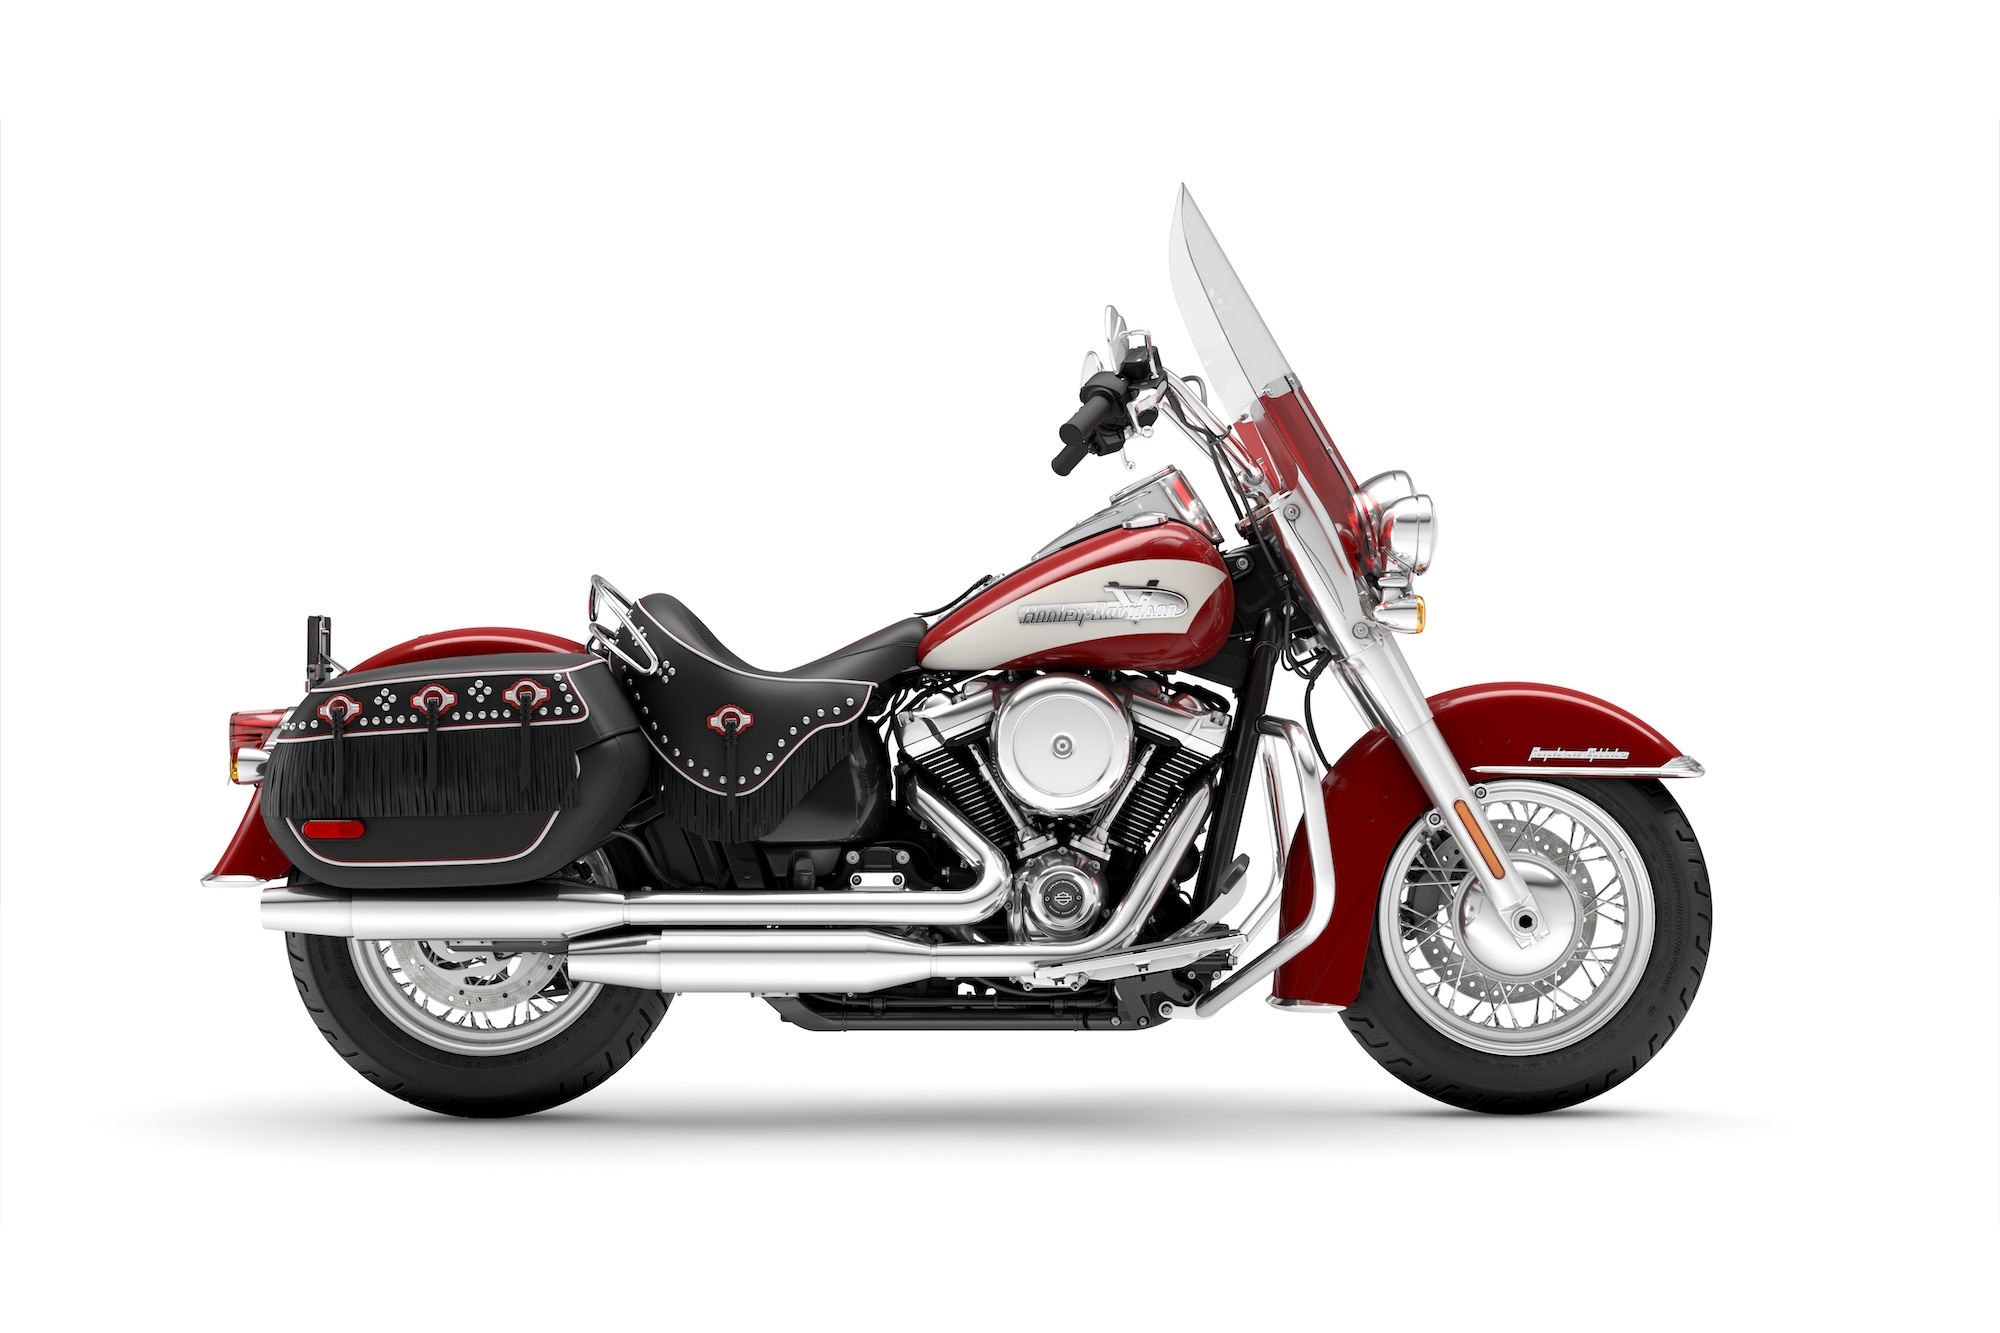 A side view of a Harley motorcycle.